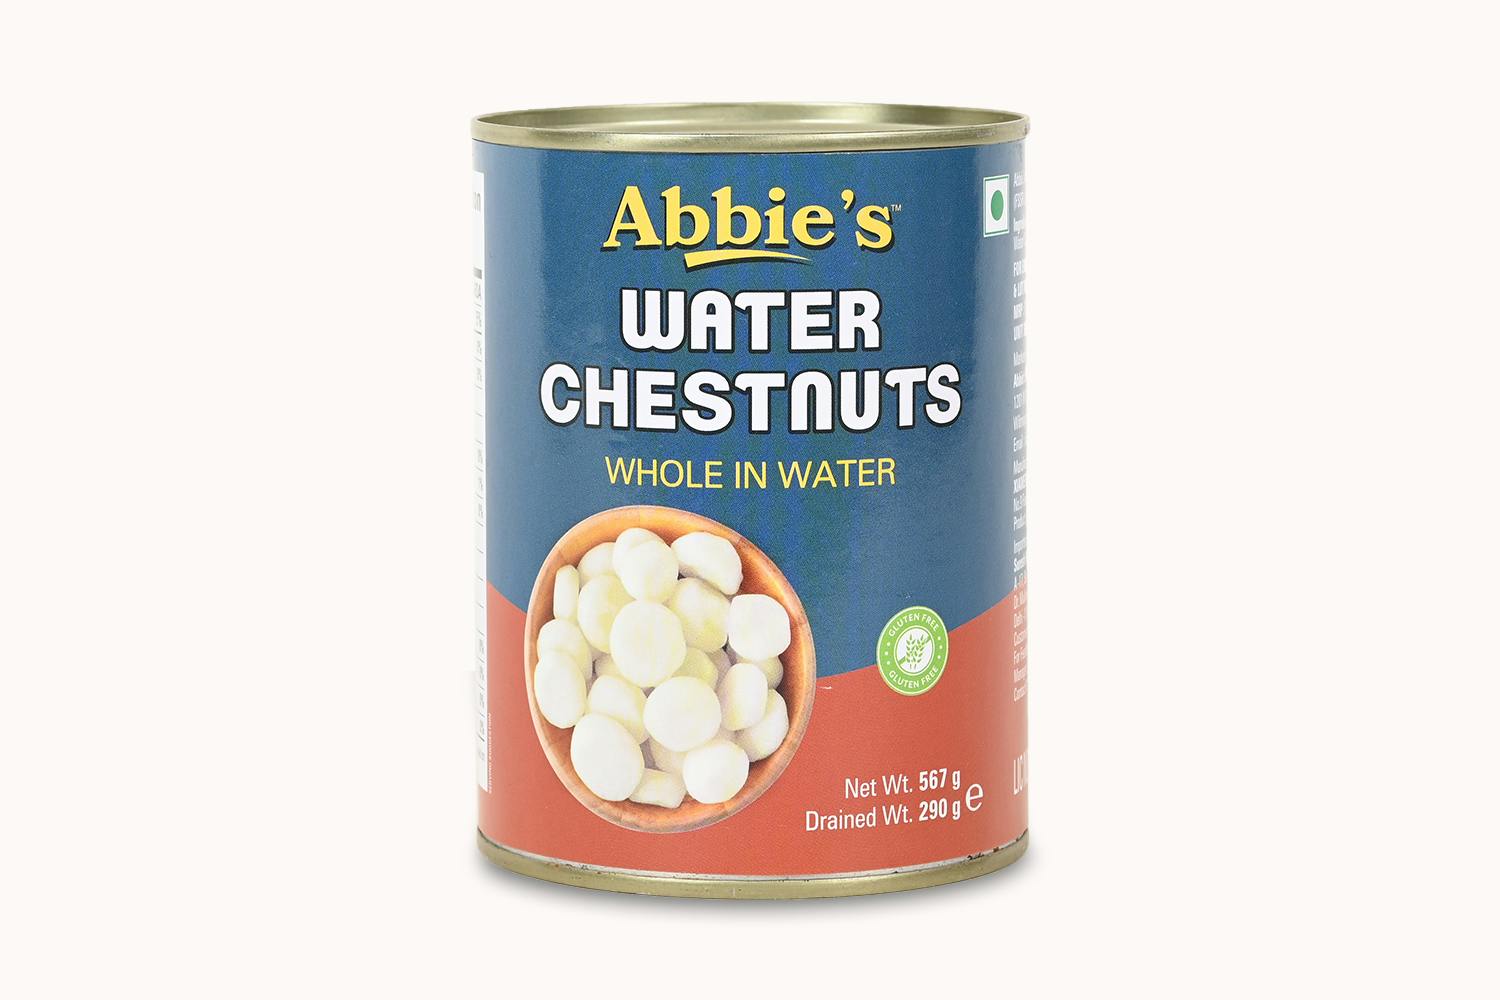 Abbie's Water Chestnuts